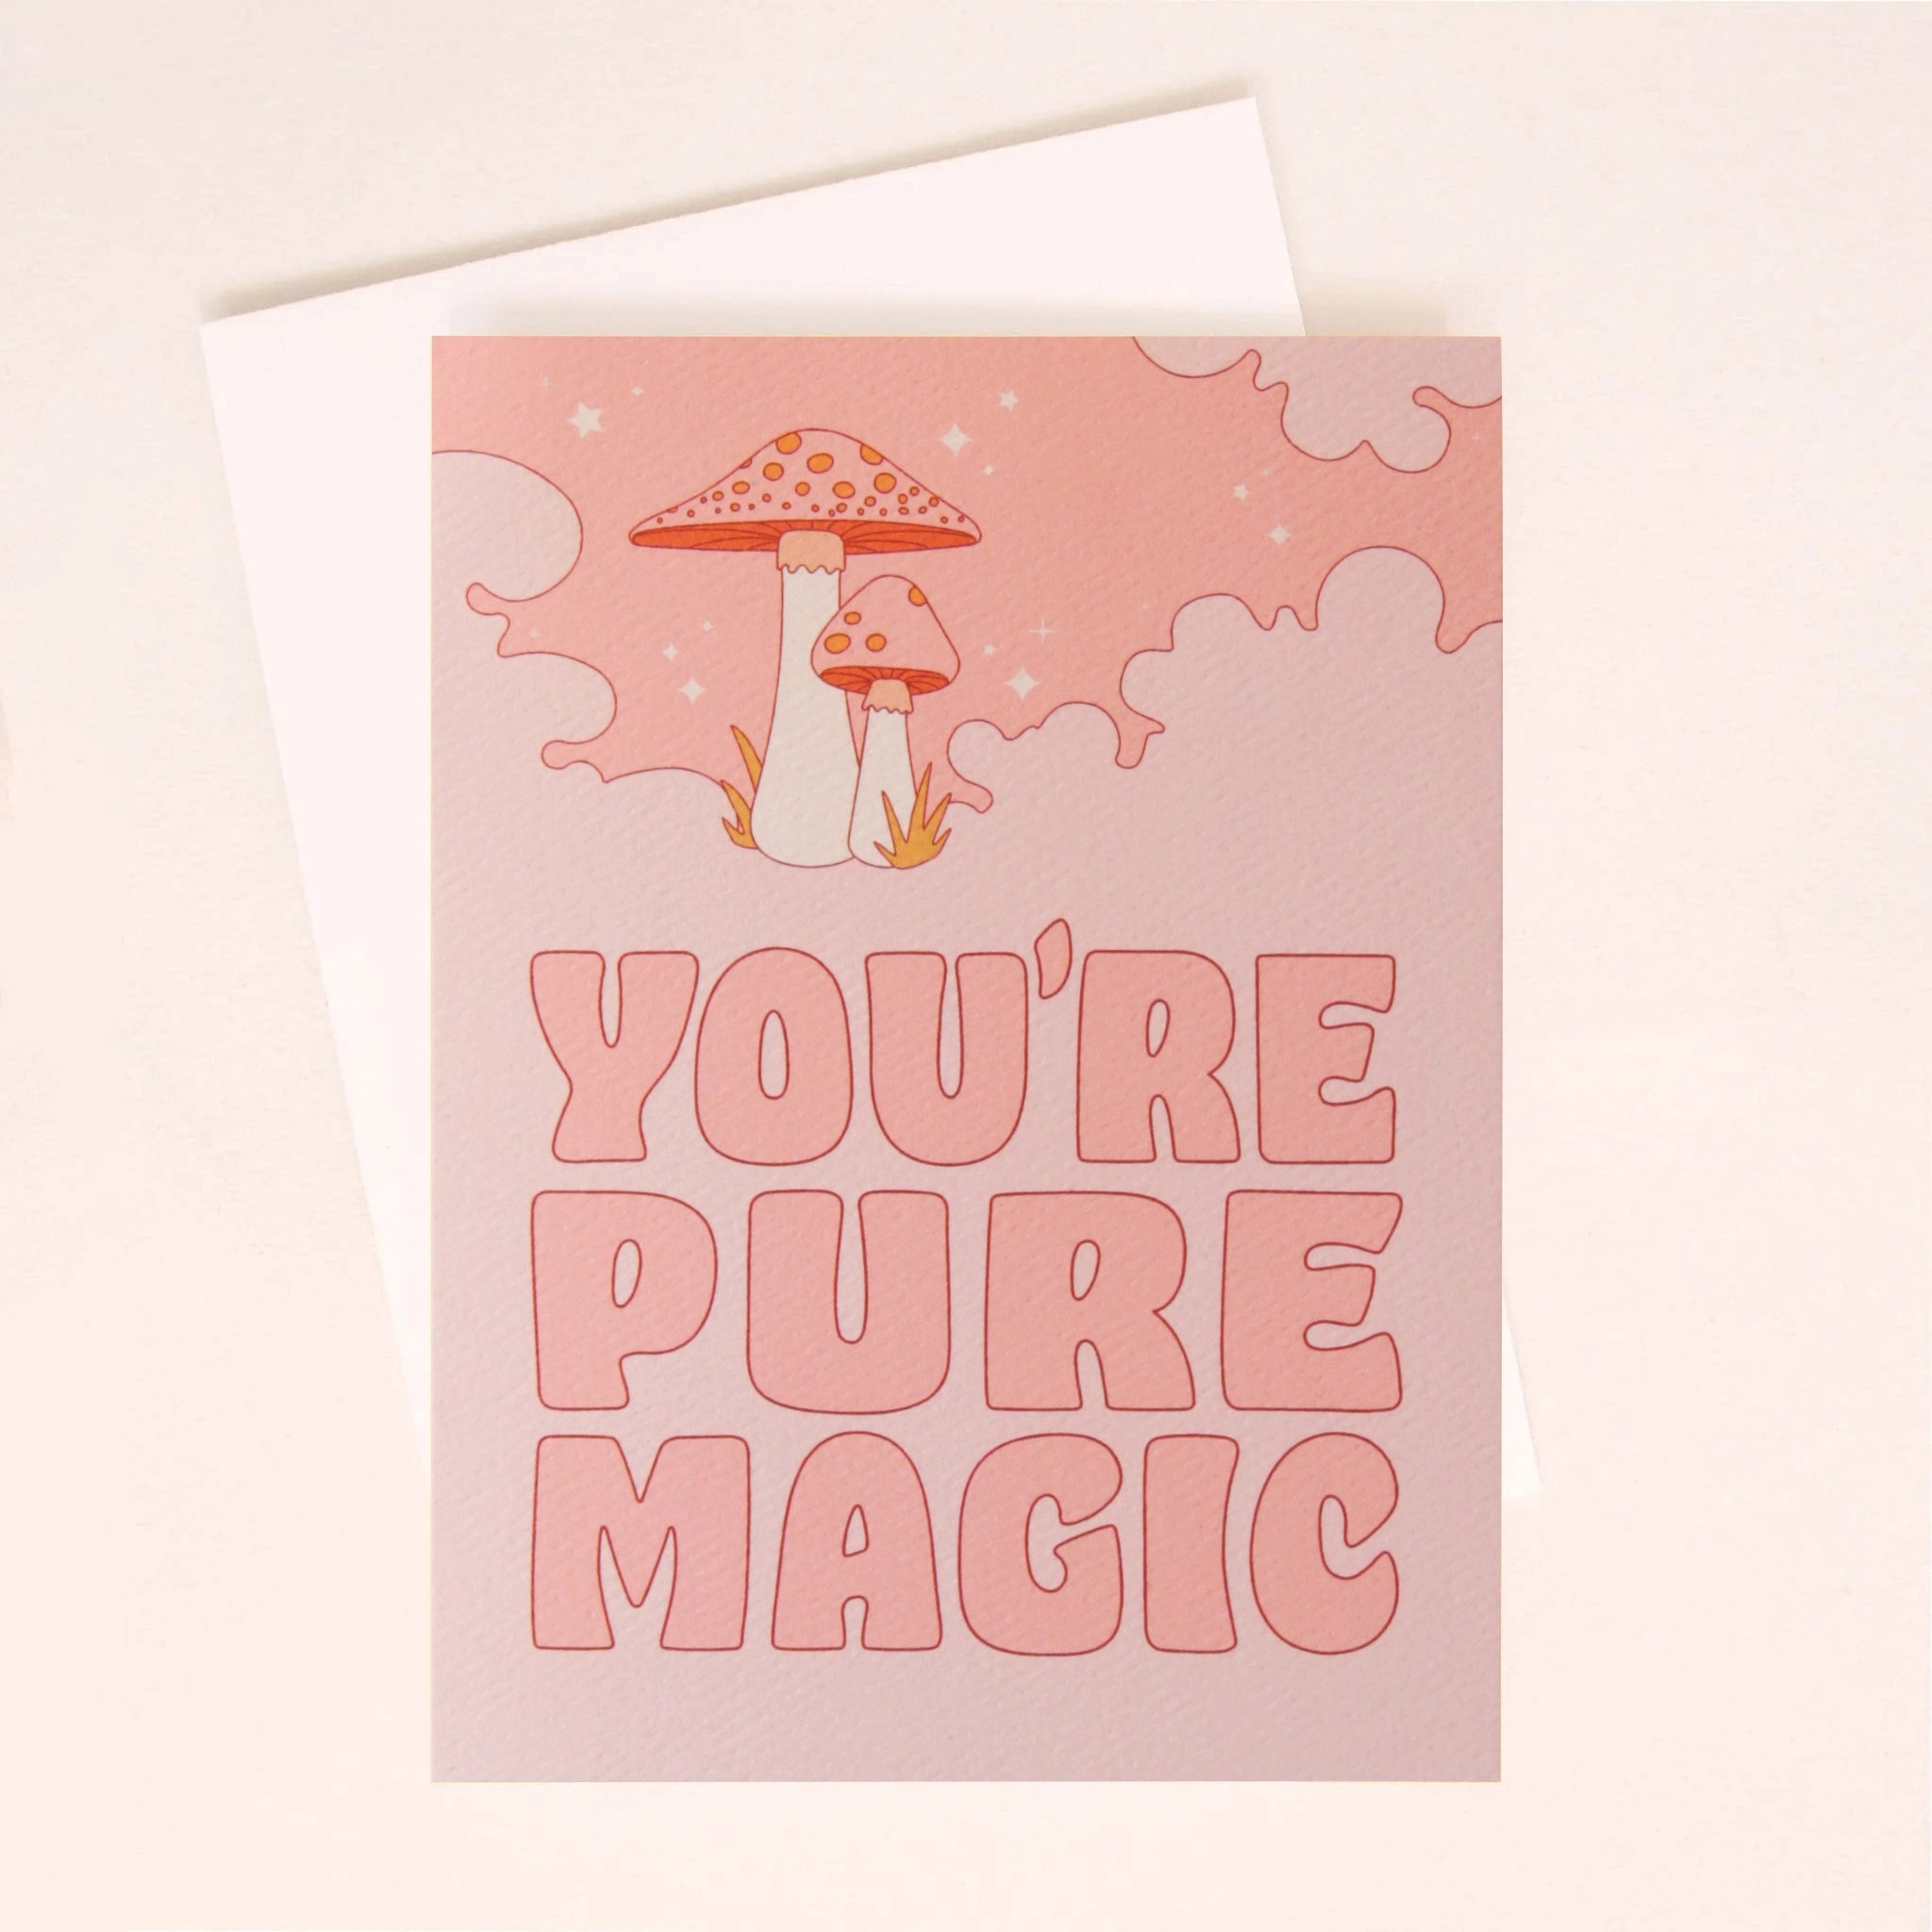 On a white background is a pink greeting card with a cloud and mushroom design and pink text that reads, "You're Pure Magic".